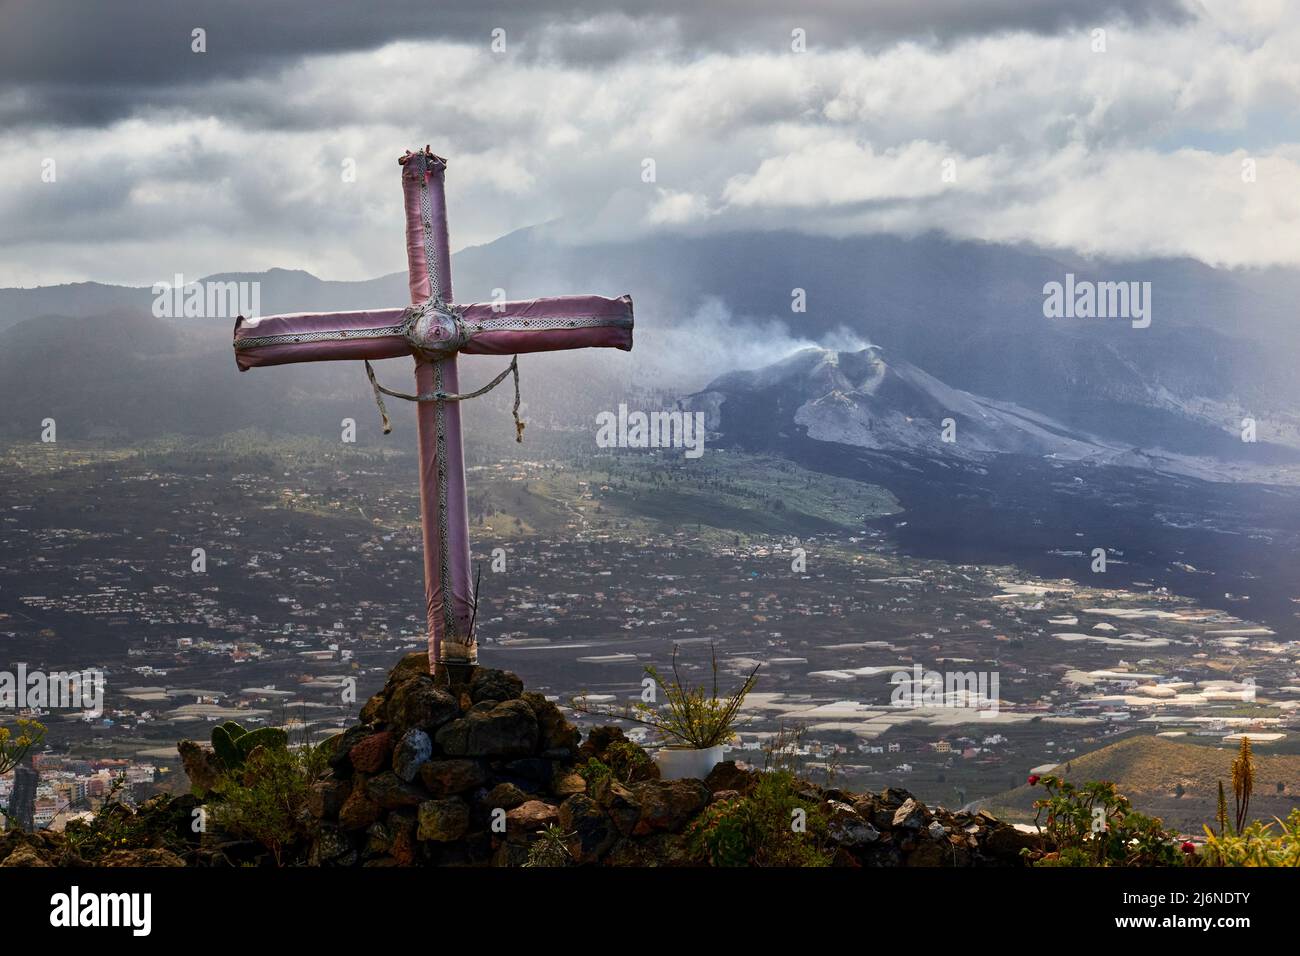 Faith And Natural Disasters - In The Foreground A Decorated Christian Cross, In The Background The Still Nameless Smoking Volcano And Lava Flows. El P Stock Photo